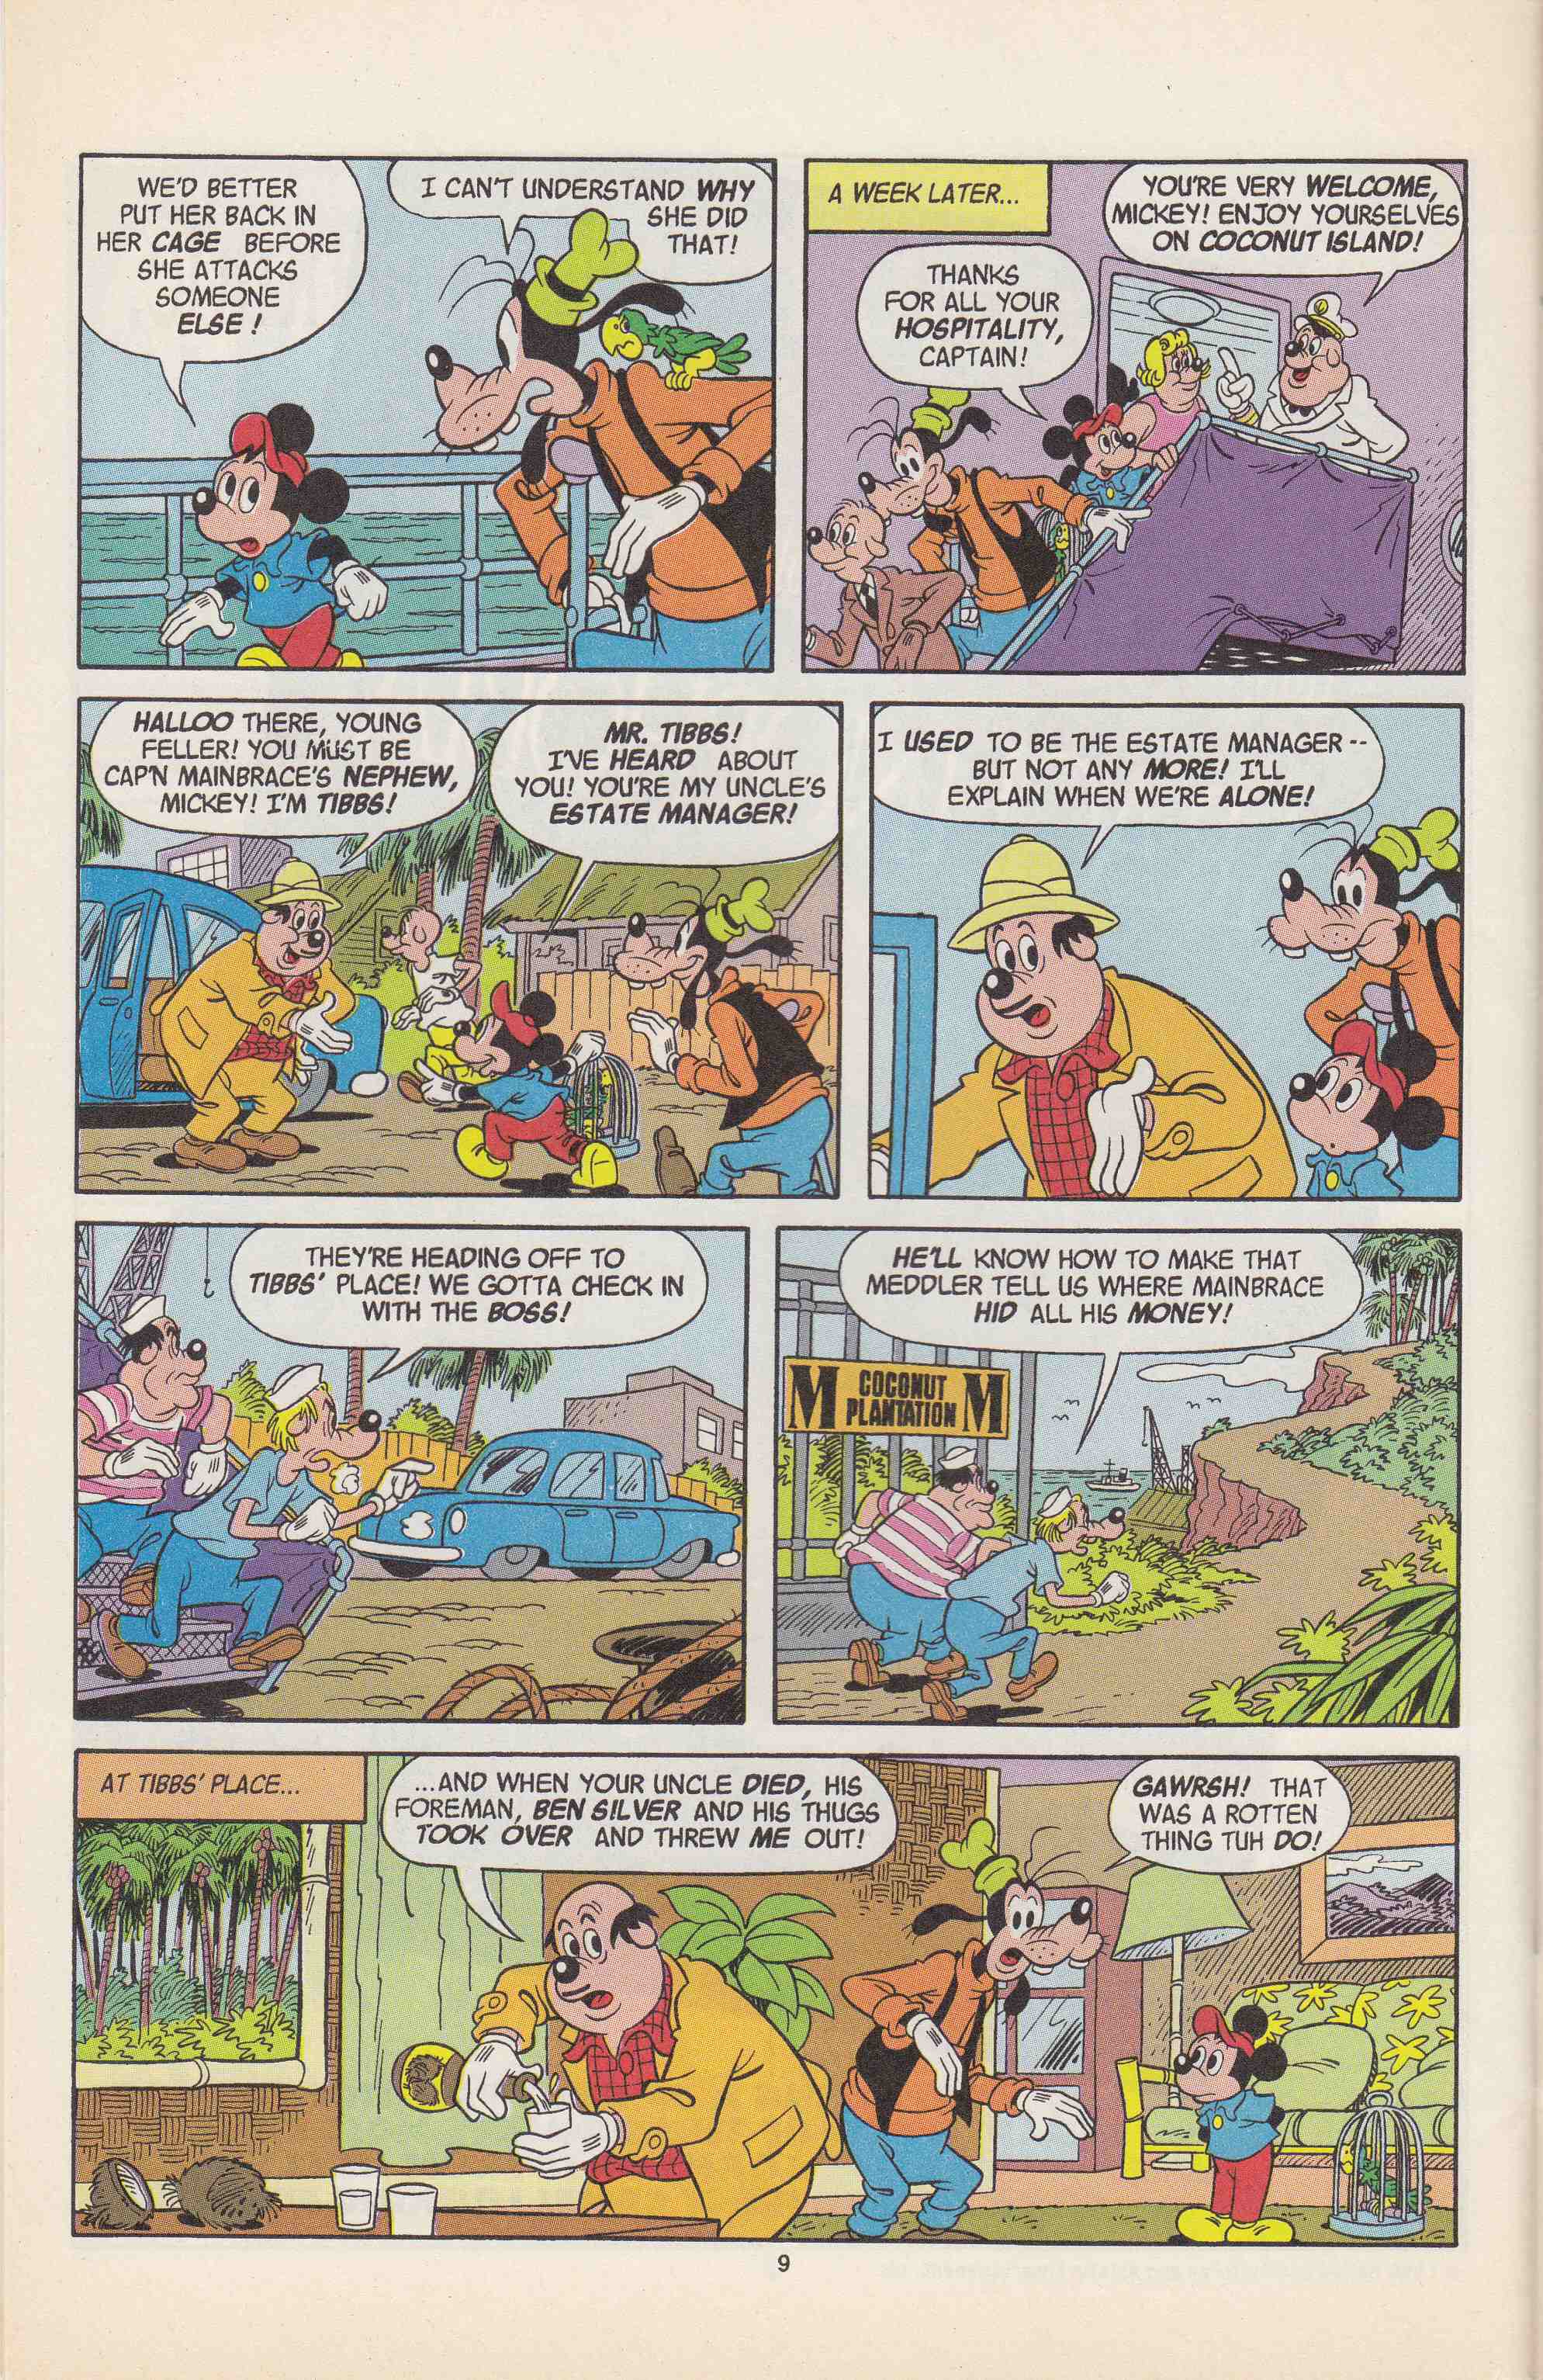 Mickey Mouse Adventures #5 #5 - English 28